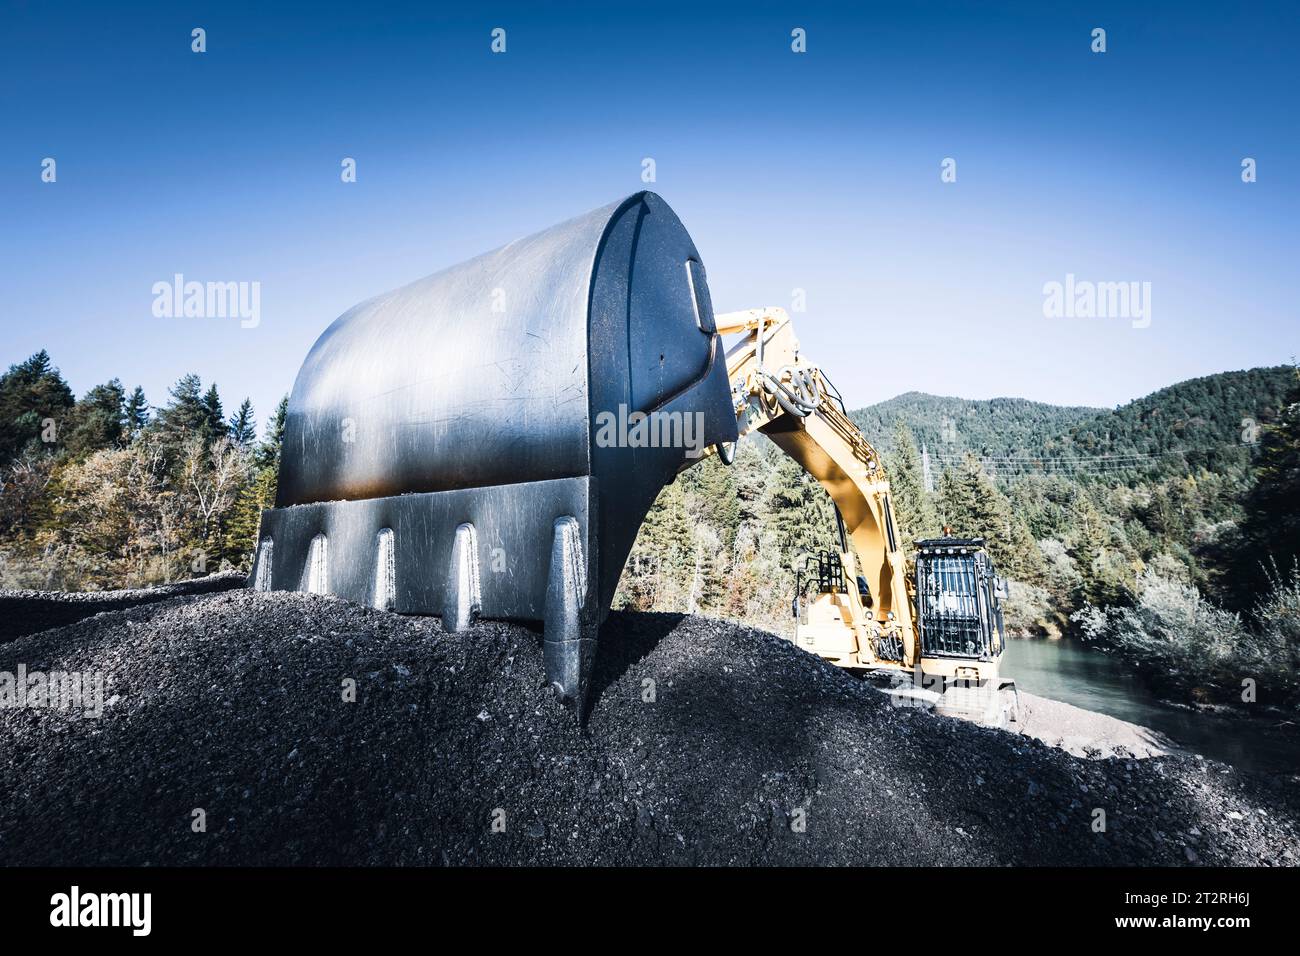 Large tracked excavator bucket in fine gravel in wooded nature with blue sky Stock Photo